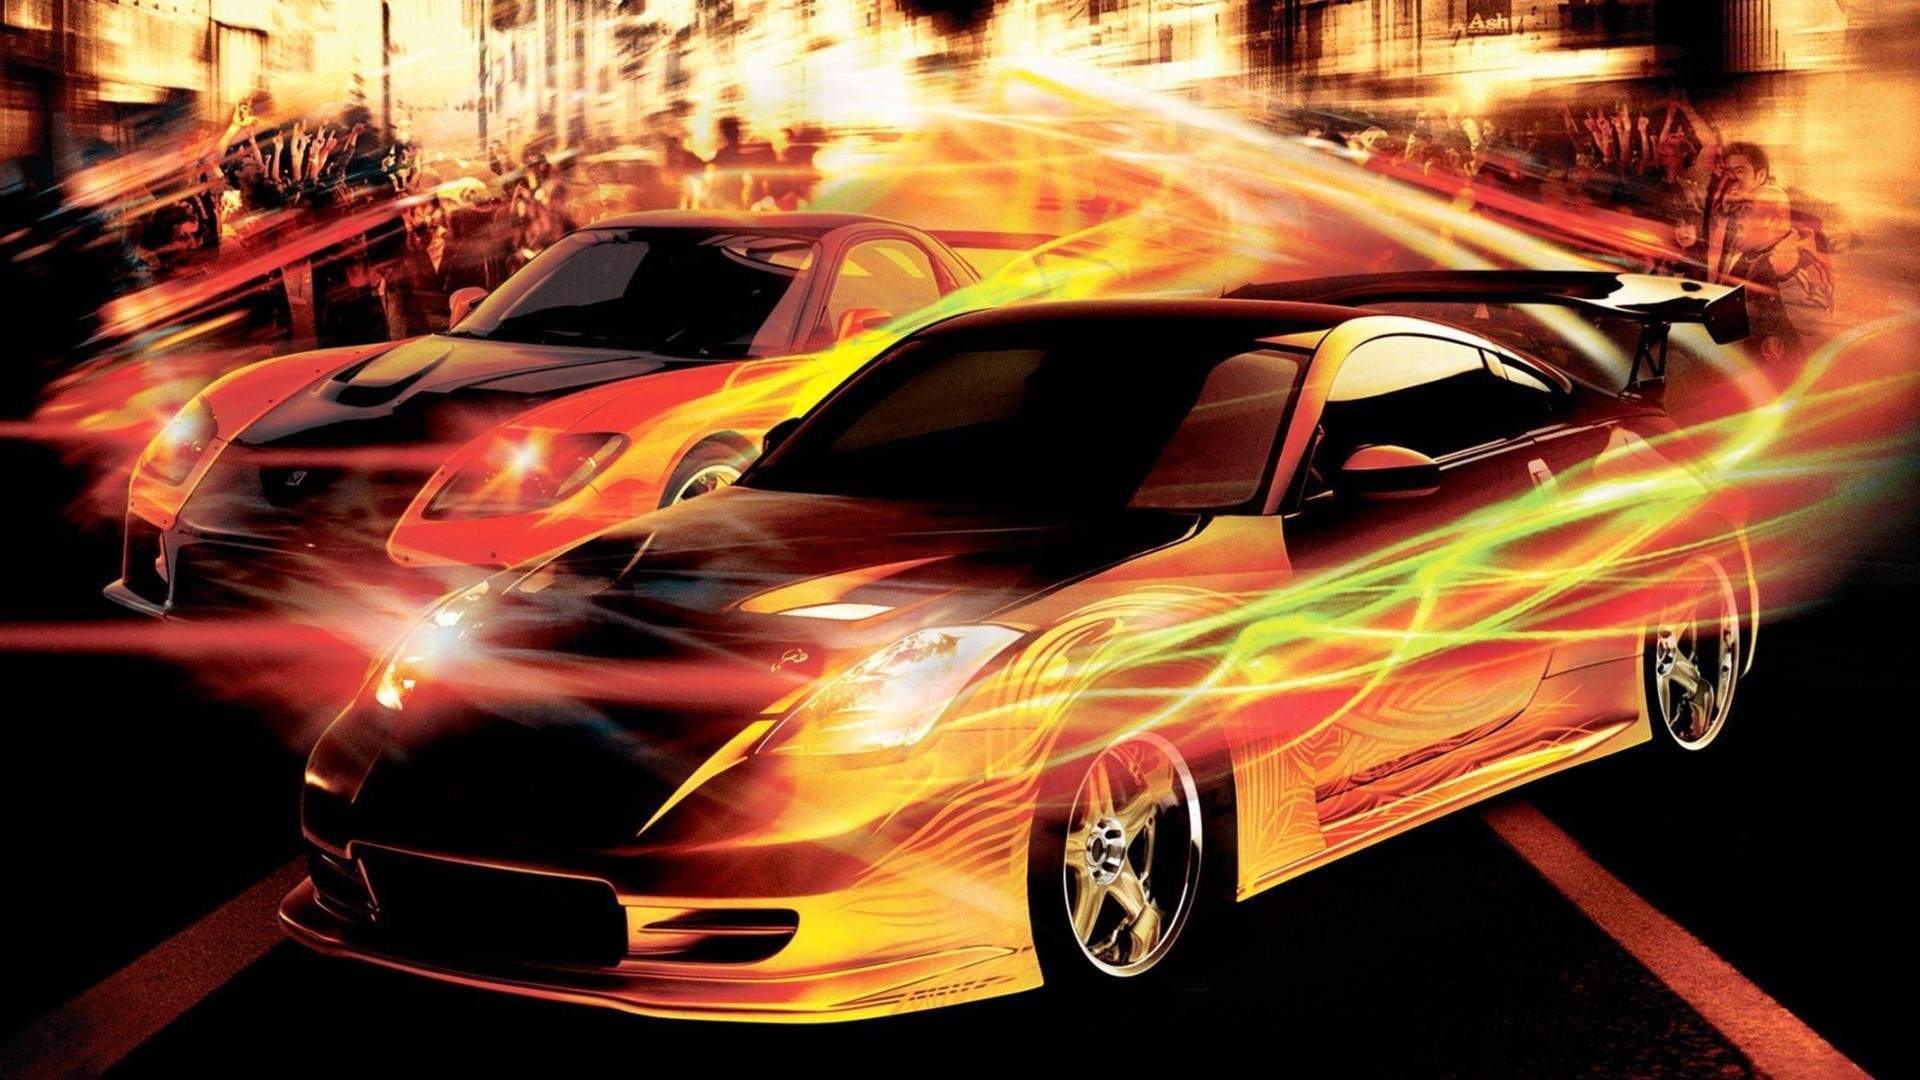 FAST AND THE FURIOUS TOKYO DRIFT tuning wallpaper 1920x1080 102771